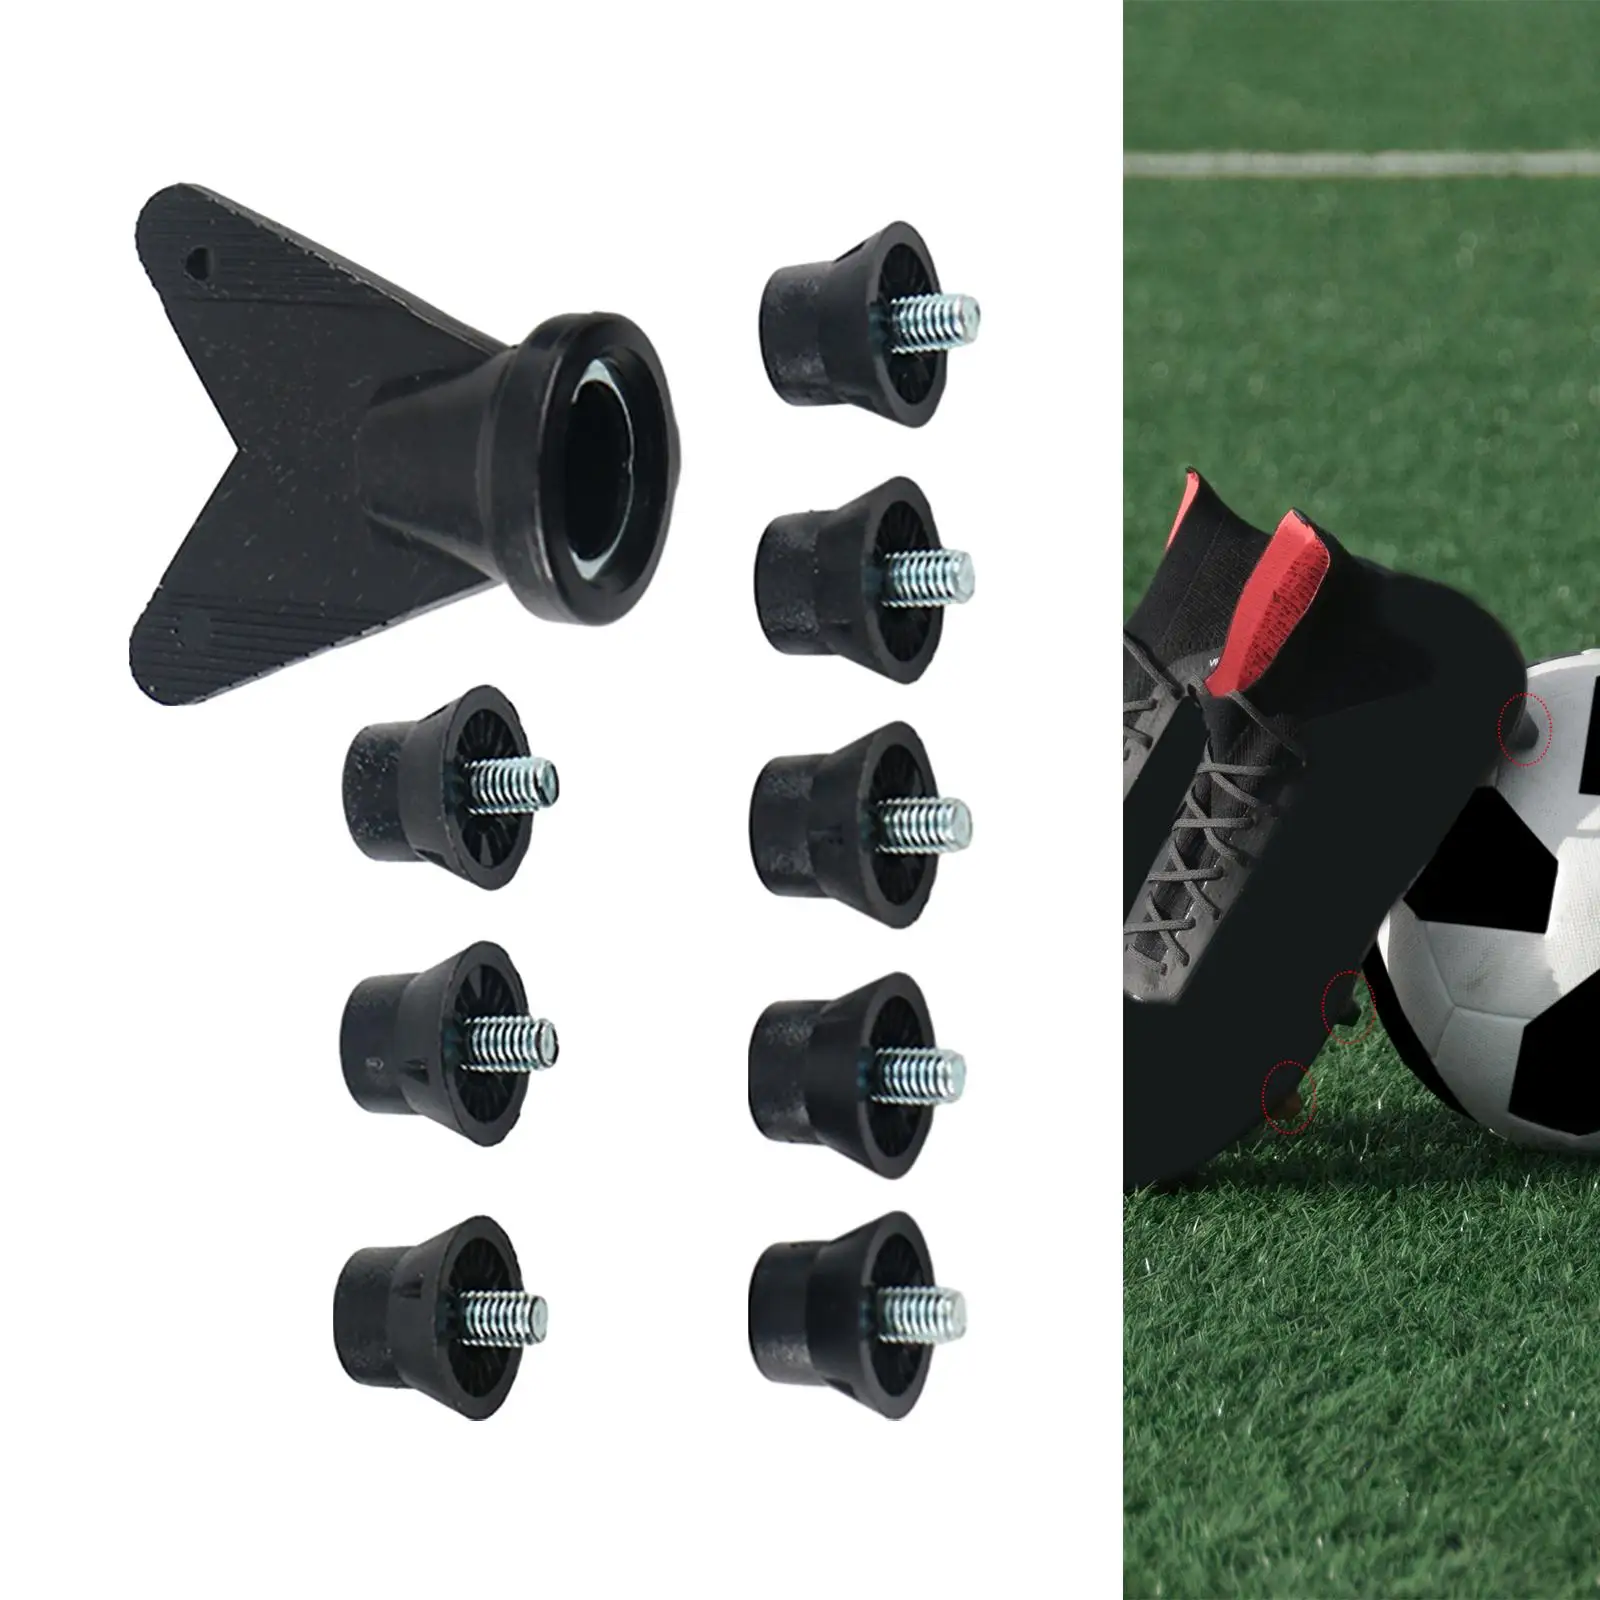 12x Rugby Studs Anti Slip Portable Football Boot Studs Soccer Shoe Spikes for Athletic Sneakers Training Indoor Outdoor Sports